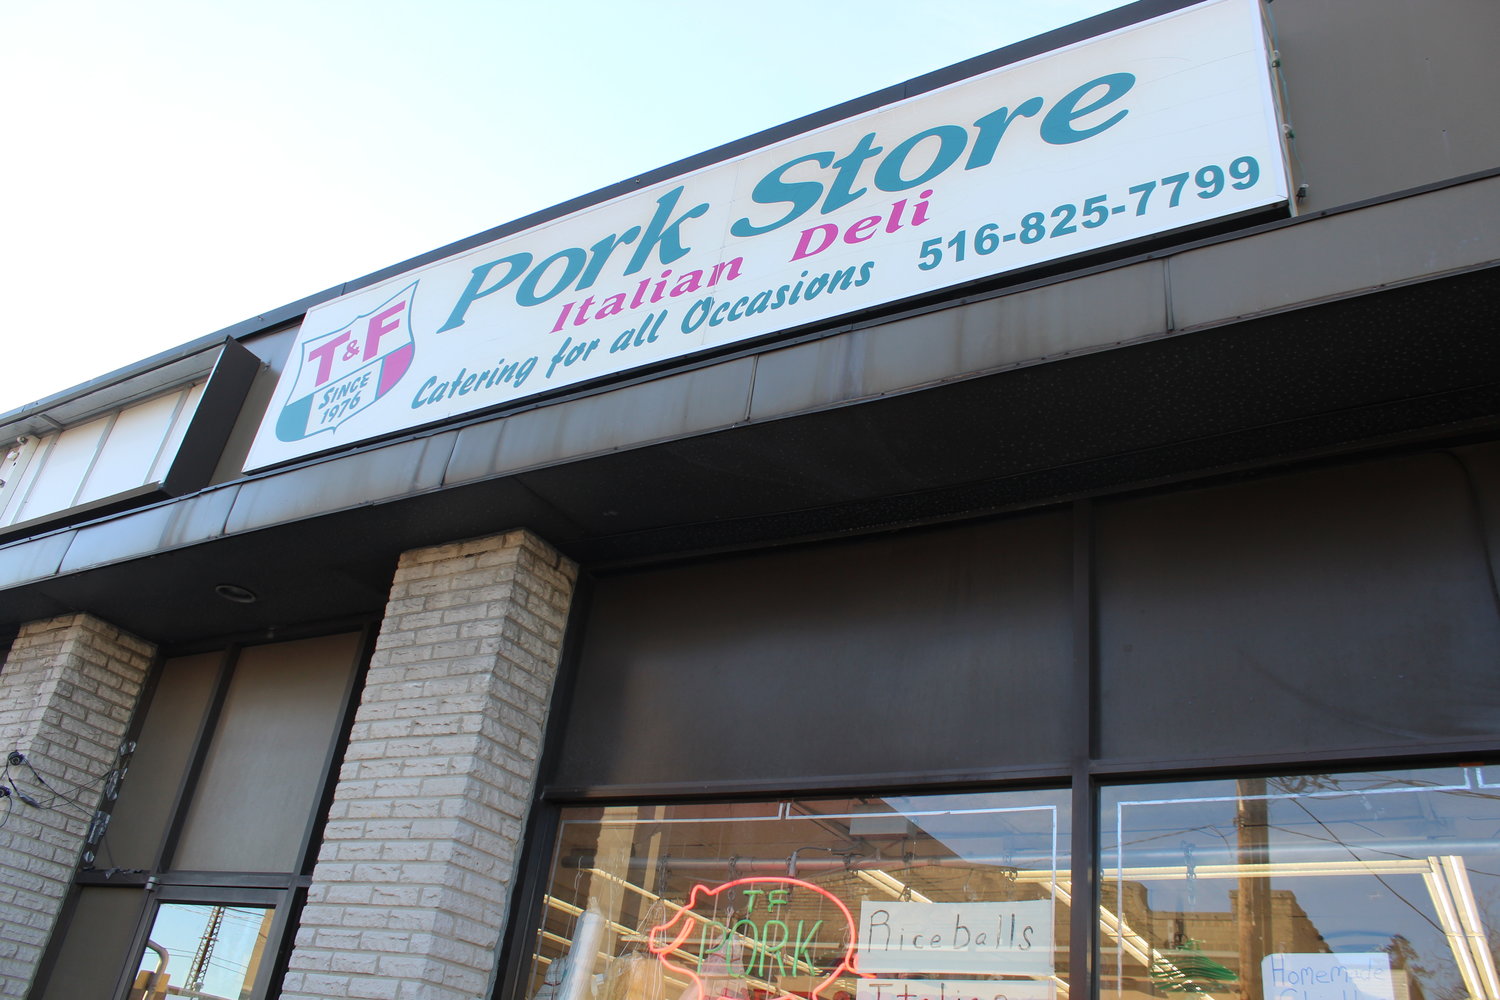 T&F Pork Store was once the only local place Valley Streamers could get authentic Italian groceries.